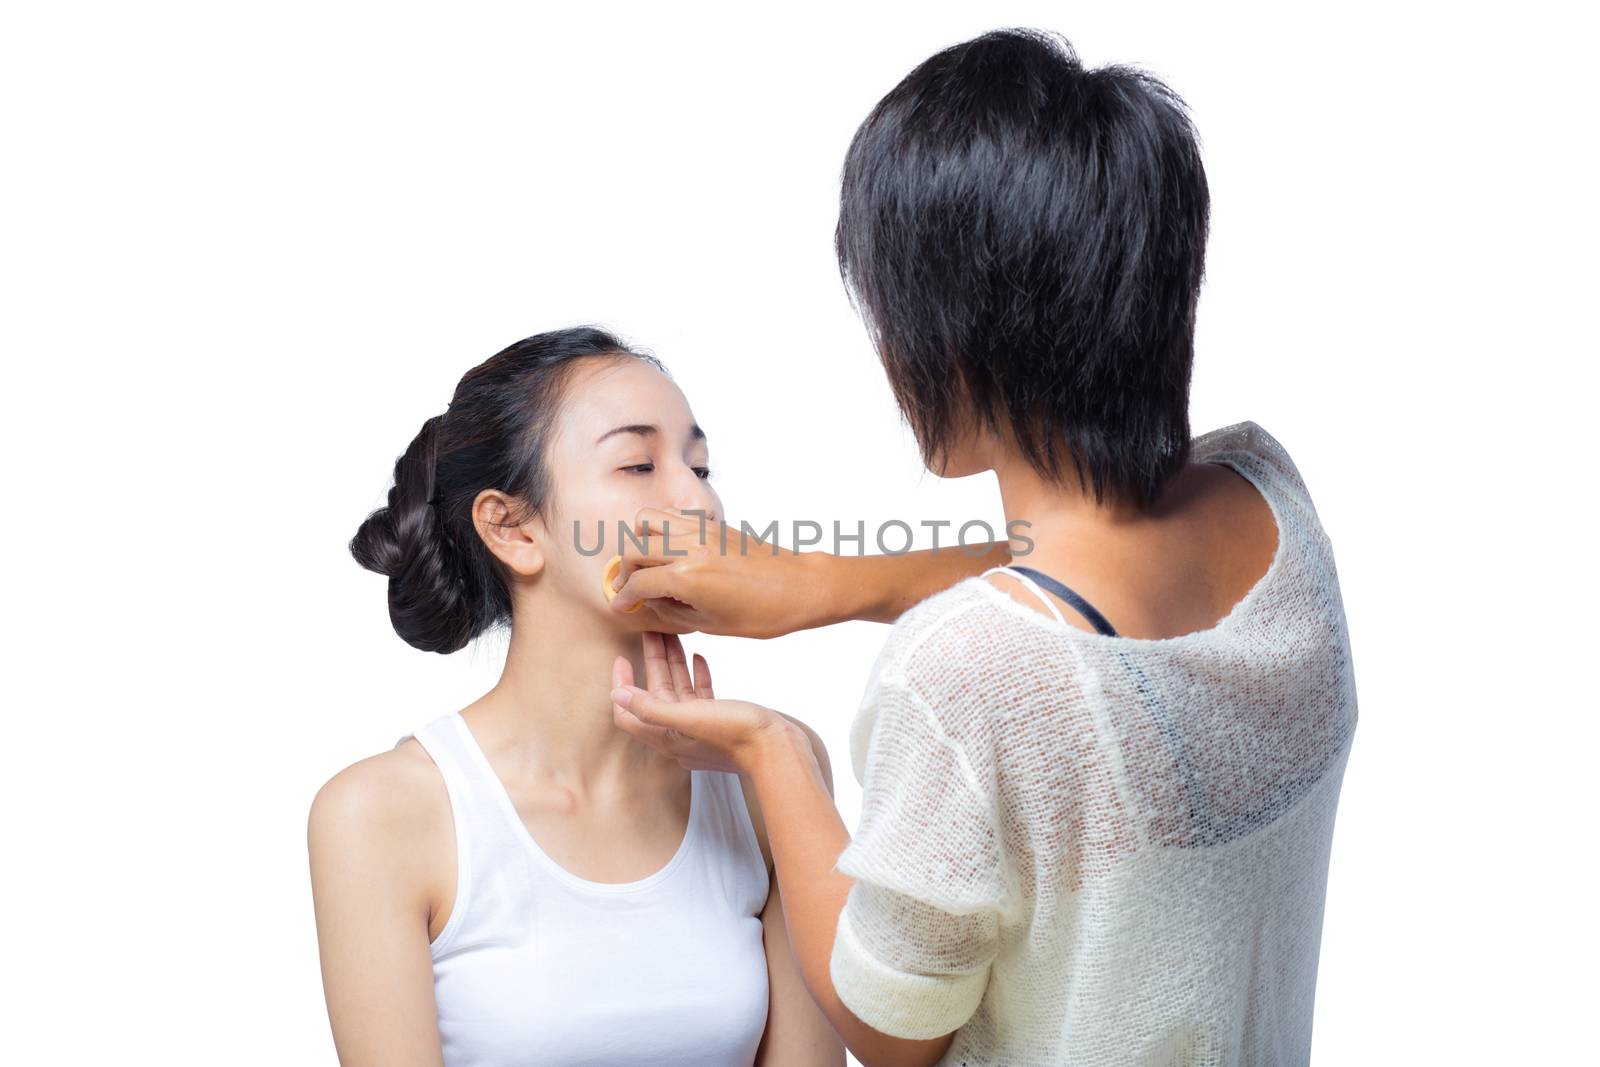 Young lady applying blusher on her face with powder puff, skin care concept.